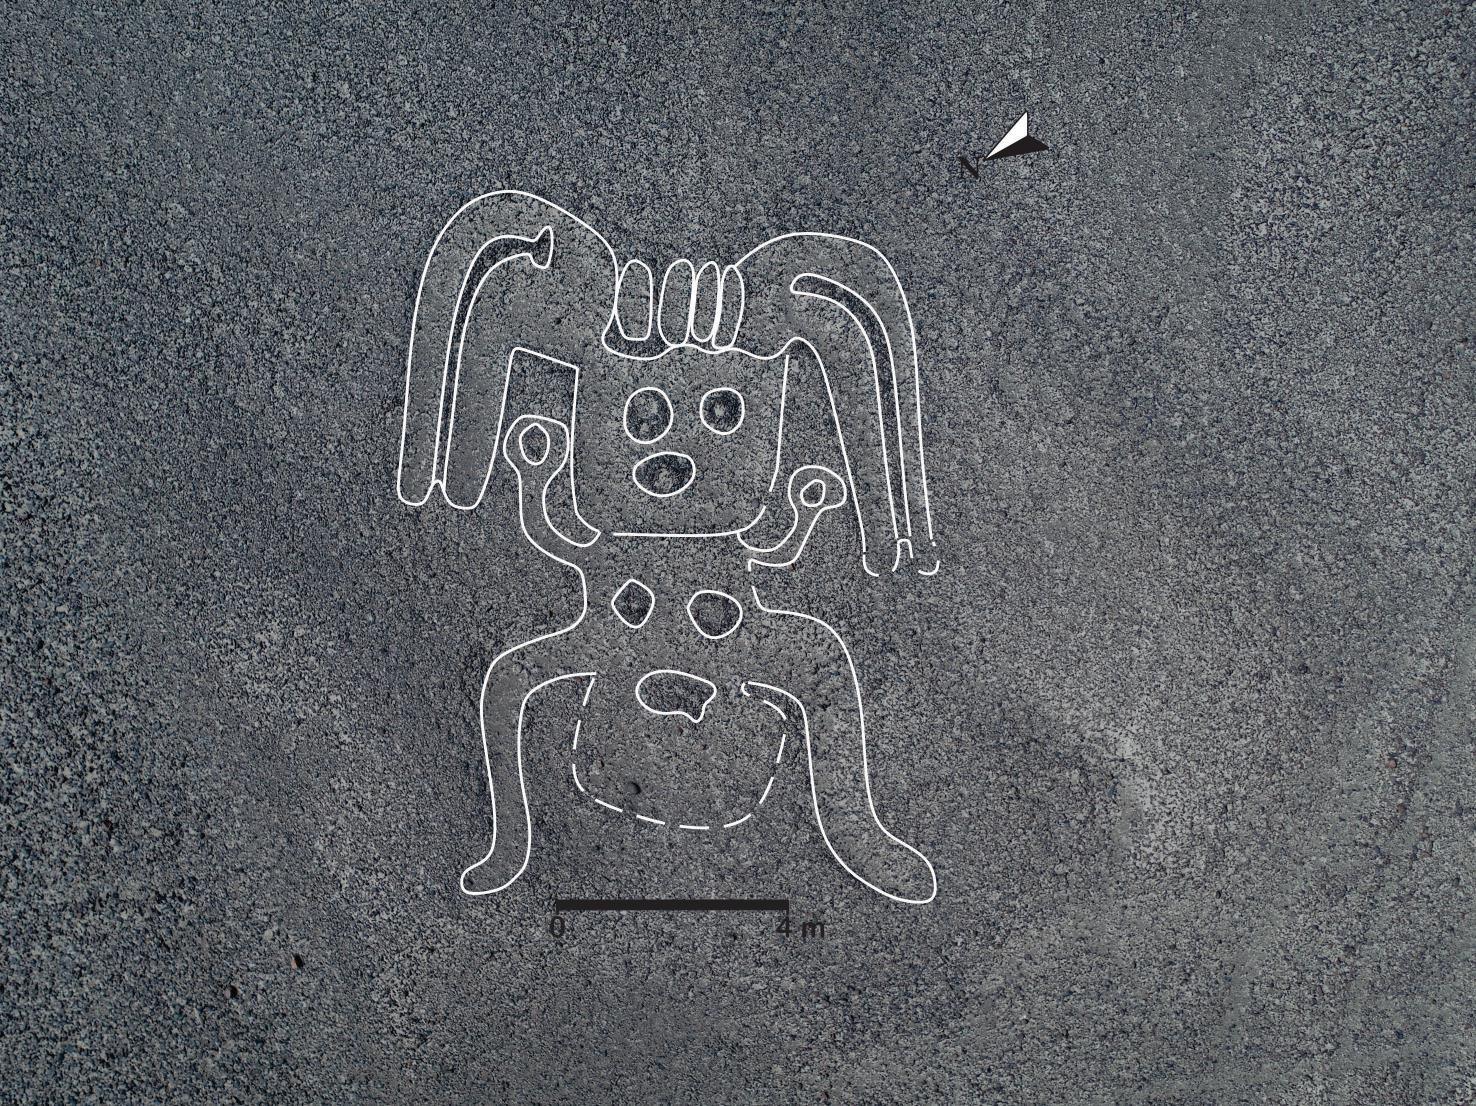 Humanoid figure found in Nazca Lines